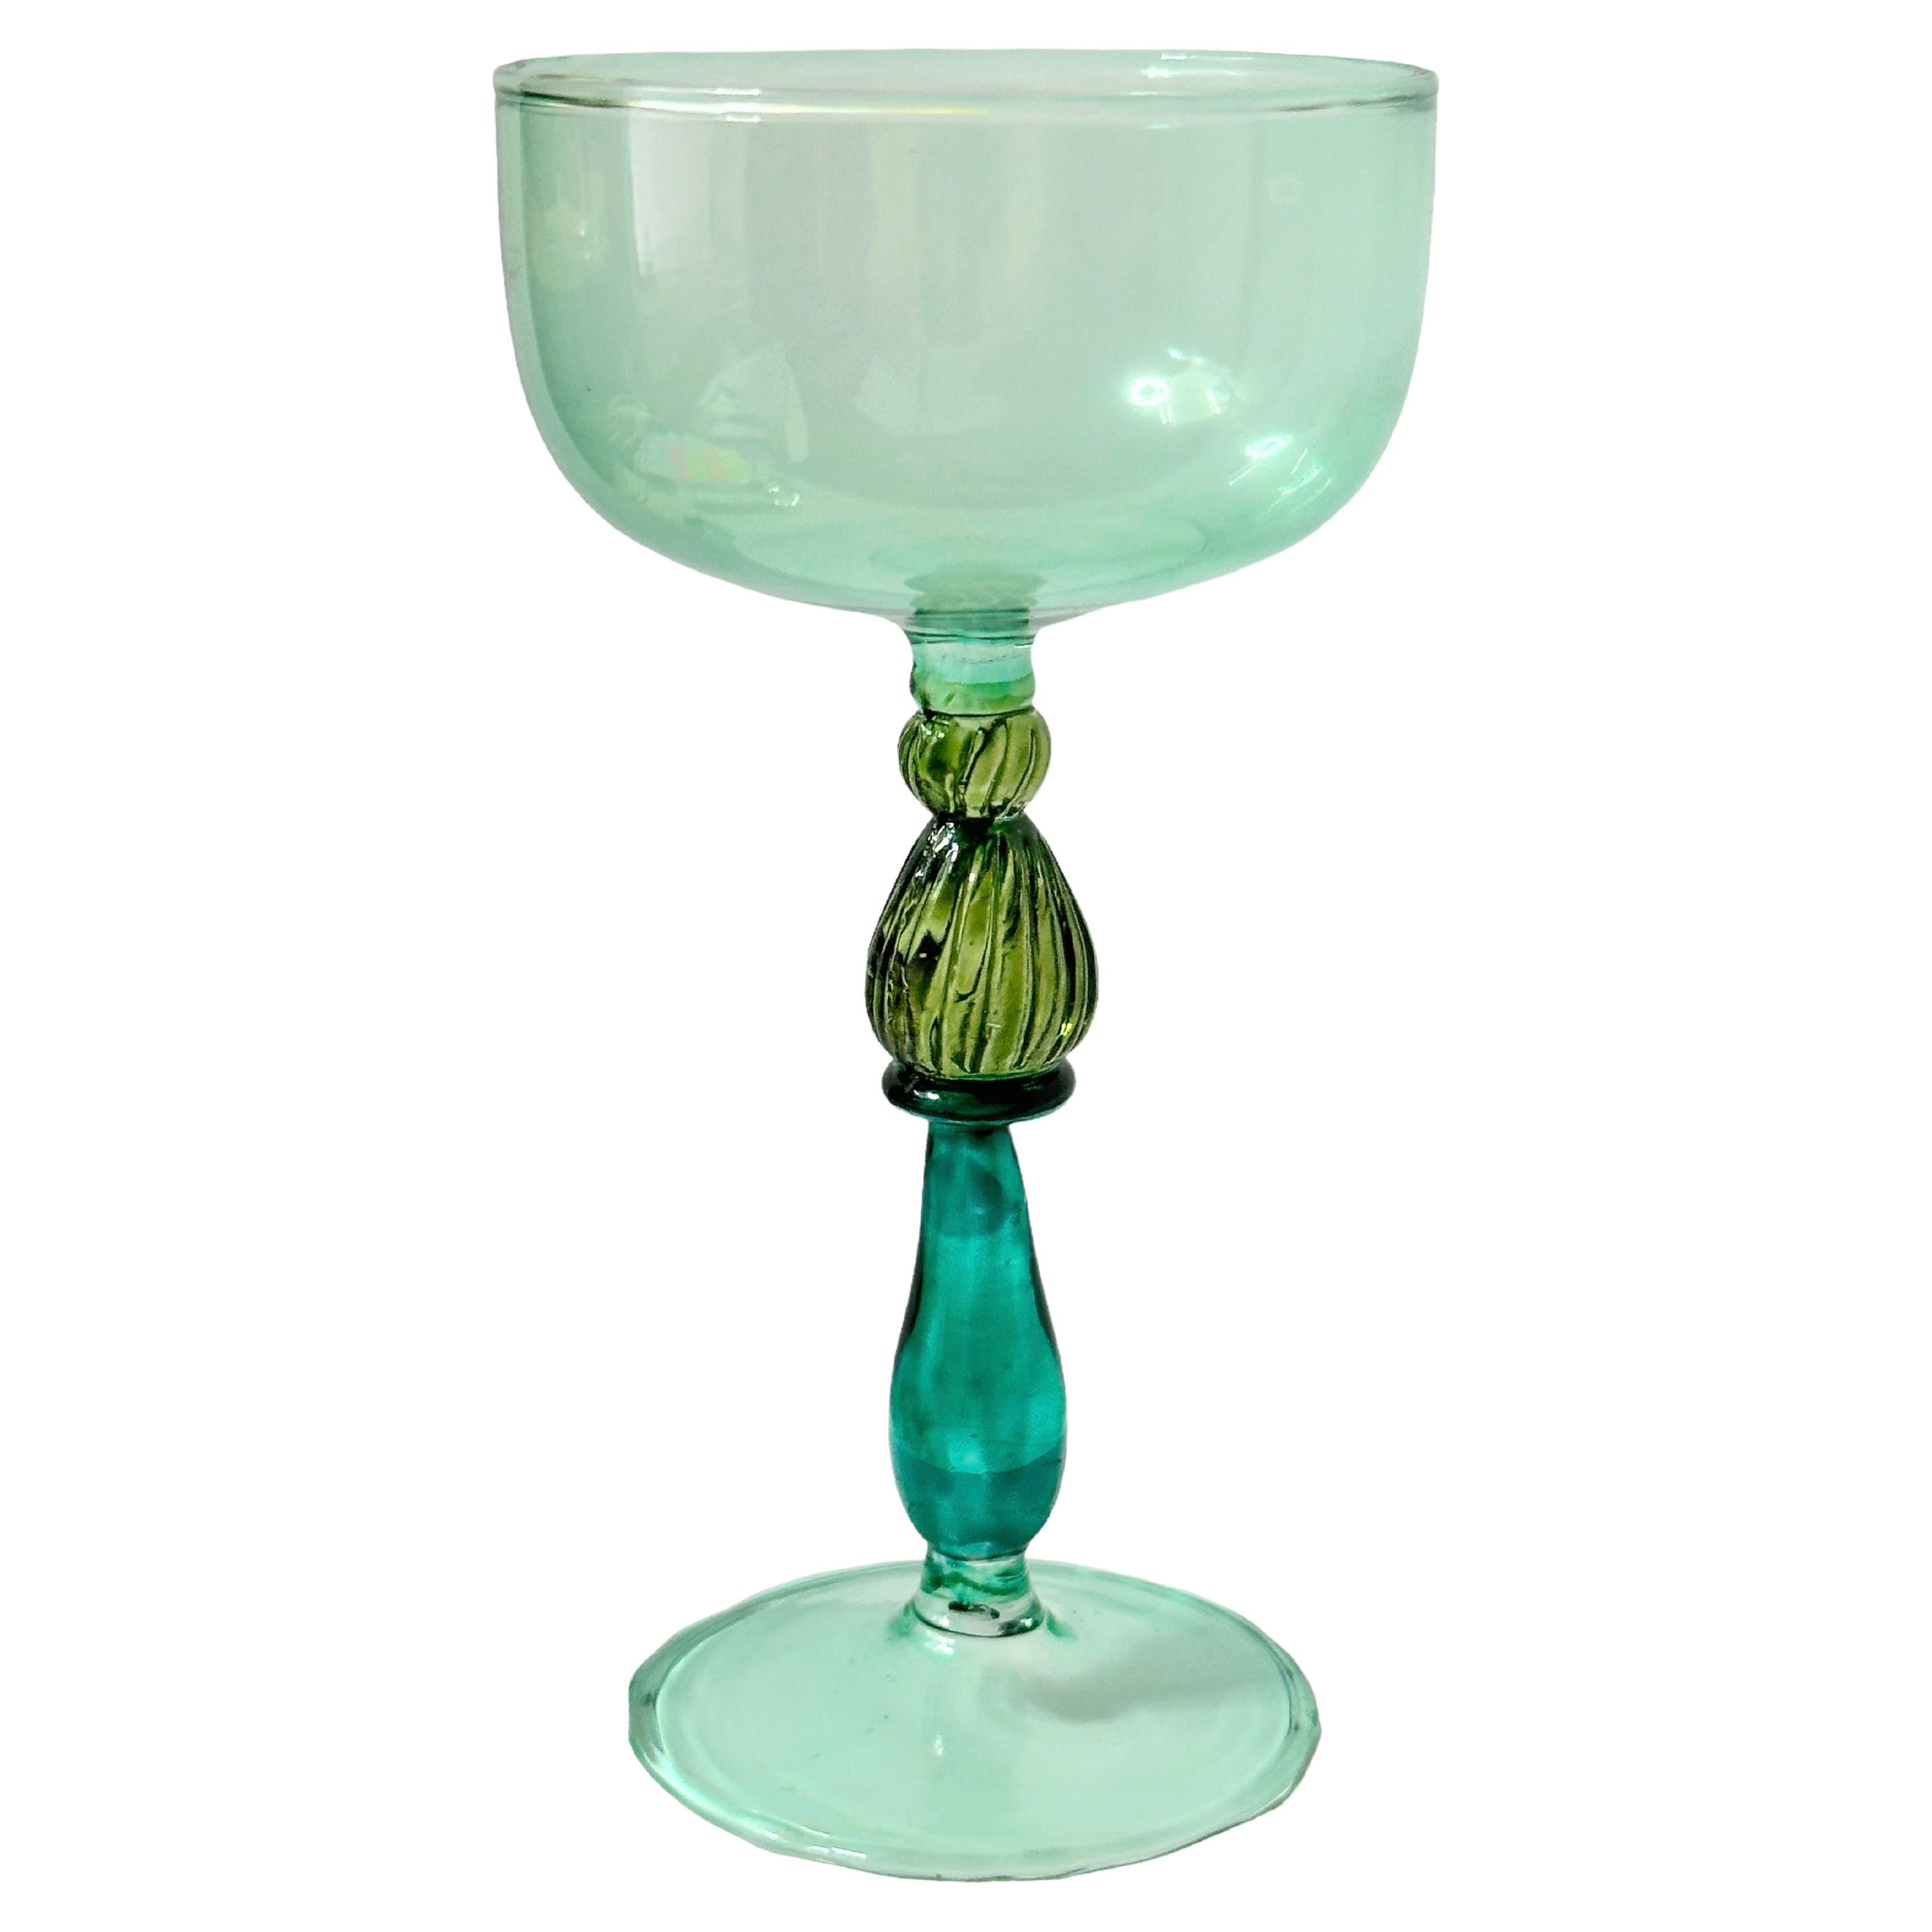 Variations of Green Salviati Murano Glass Liqueur Goblet, Vintage Italy 